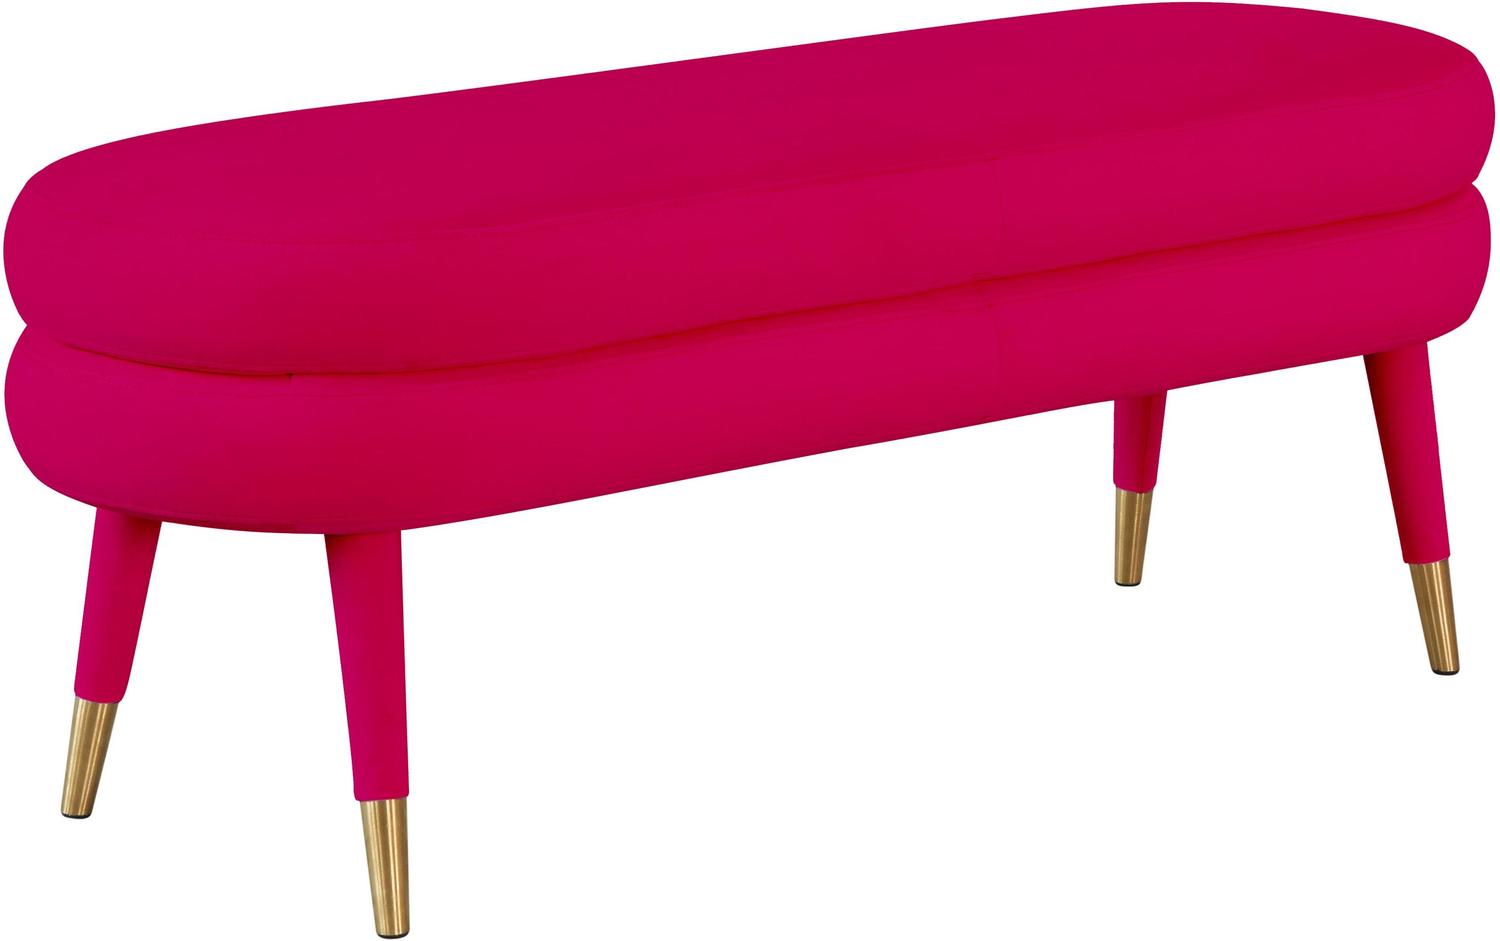 Tov Furniture Benches Ottomans and Benches Pink